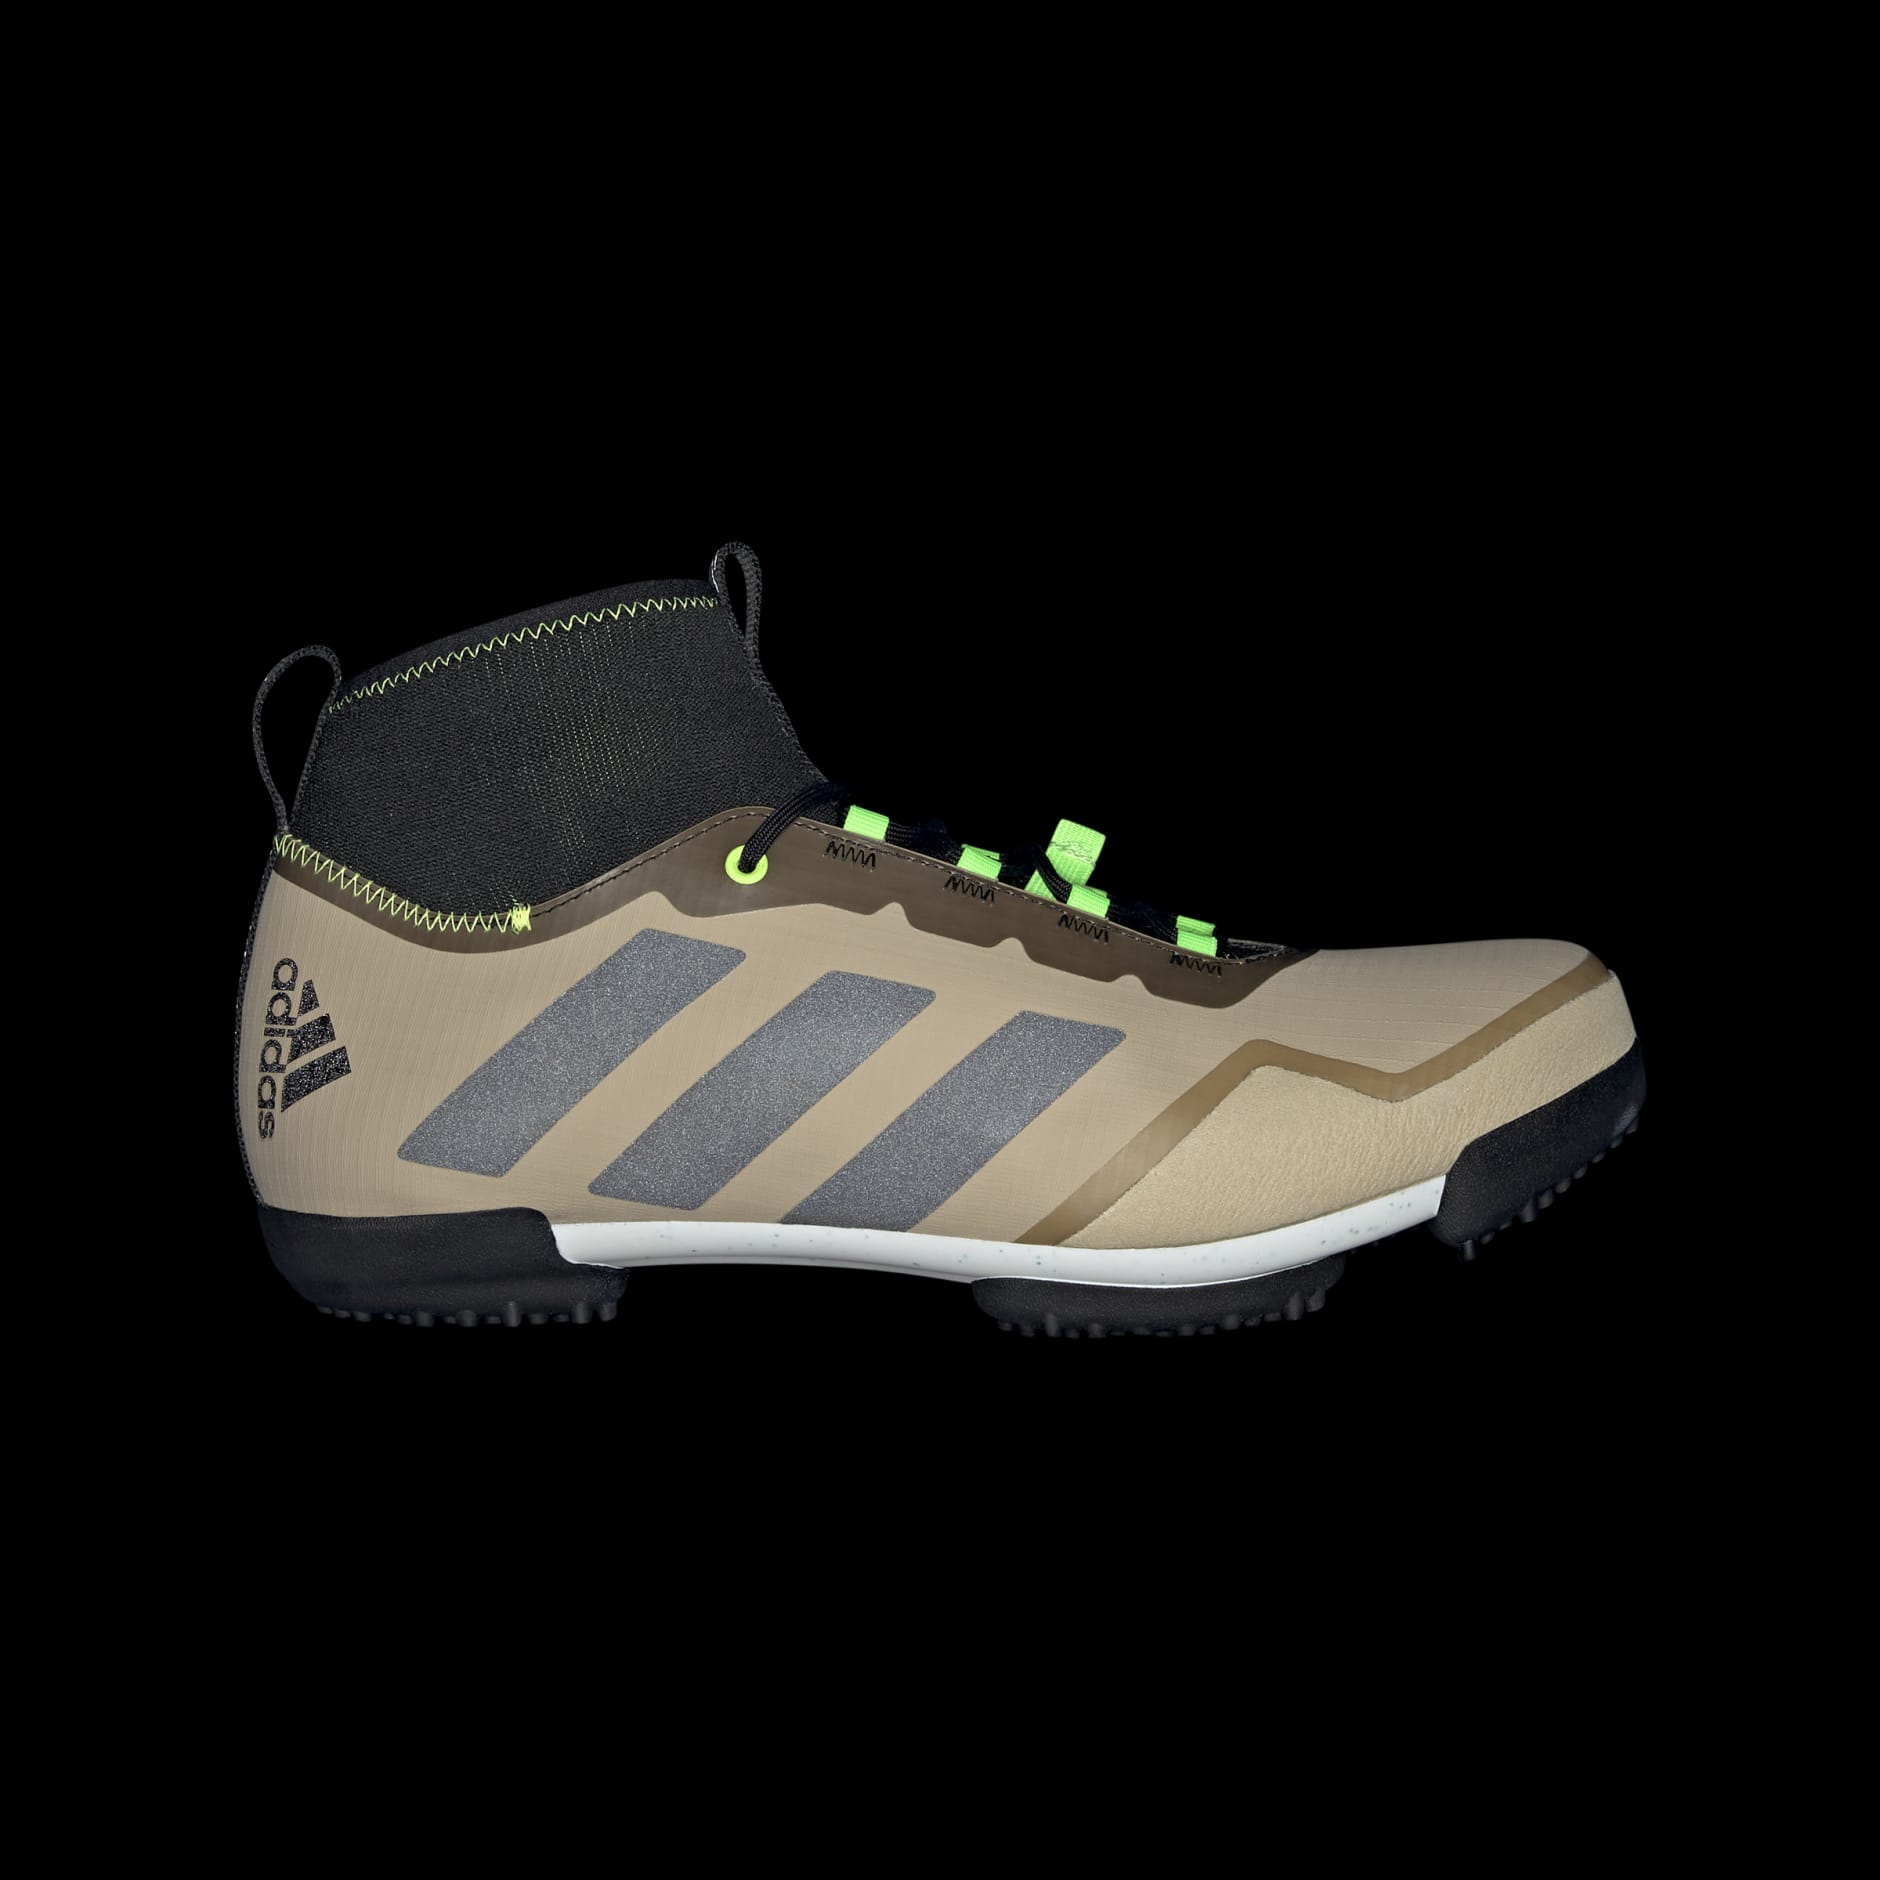 Franco conectar Marca comercial All products - The Gravel Cycling Shoes - Beige | adidas Saudi Arabia